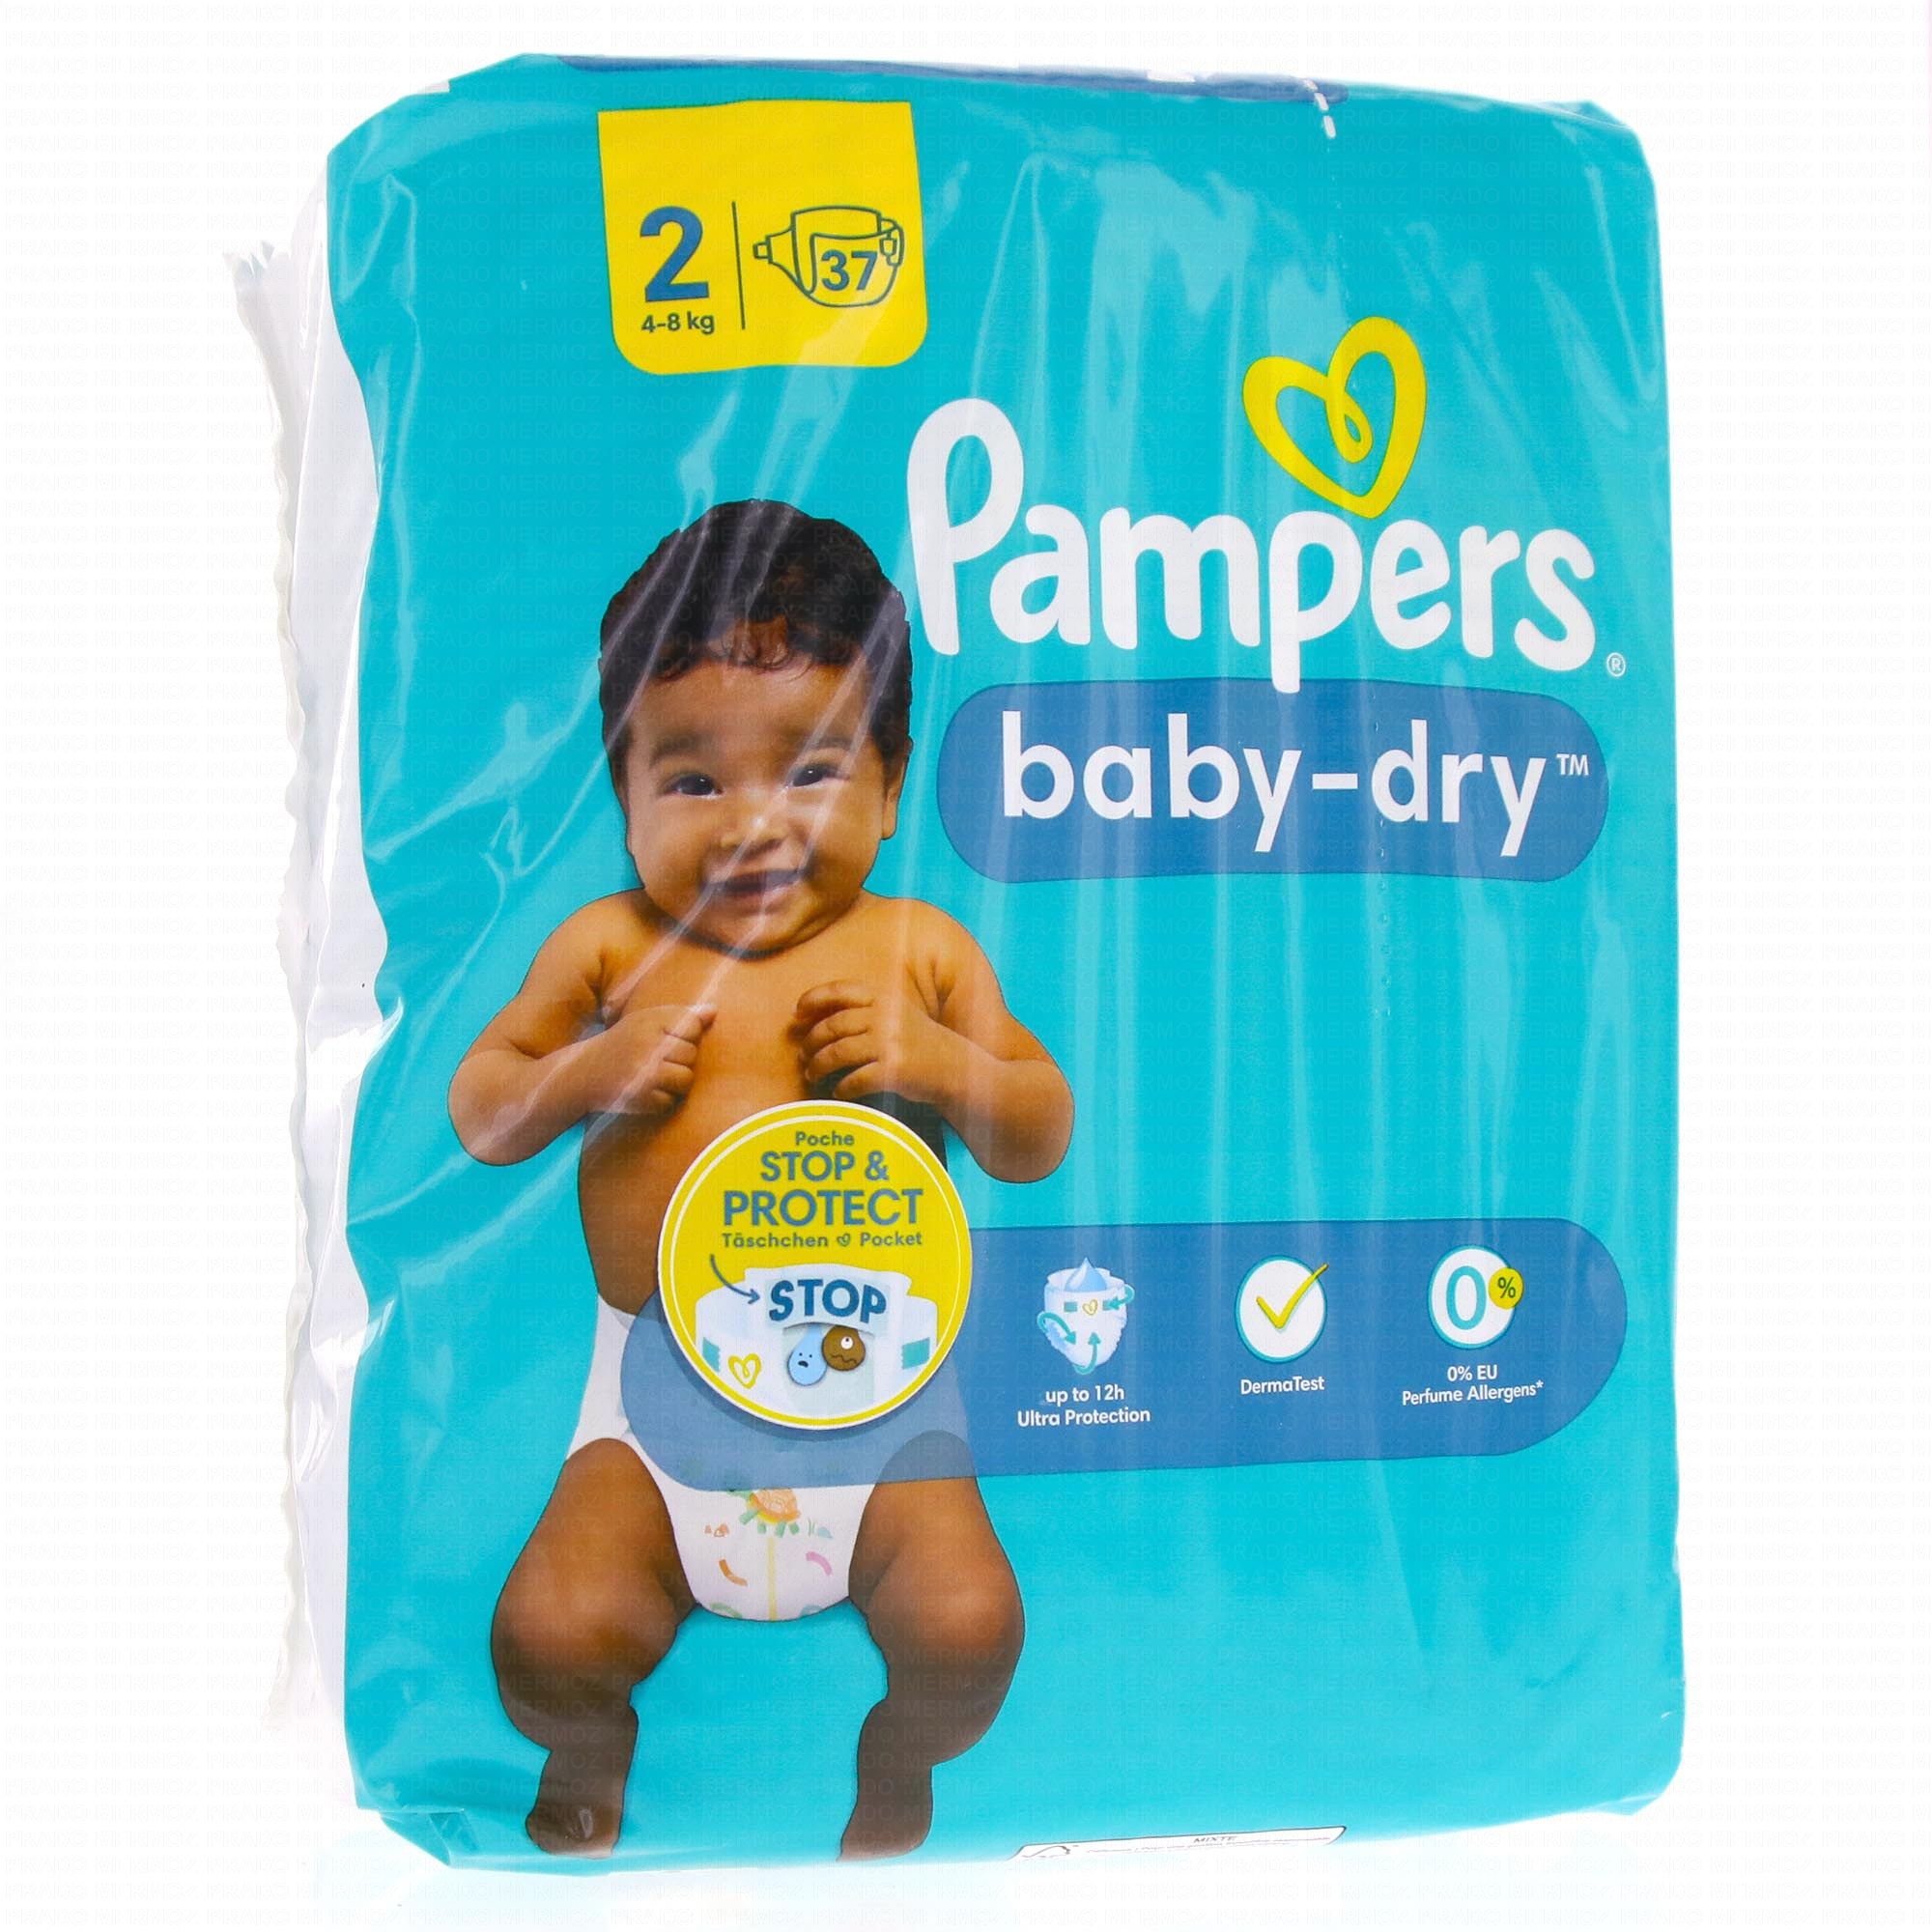 https://www.parapharmacie-et-medicament.com/client/840002/media/files/PAMPERS-Baby-dry-12h-Taille-2-37-couches-106970_101_1704984122.jpg